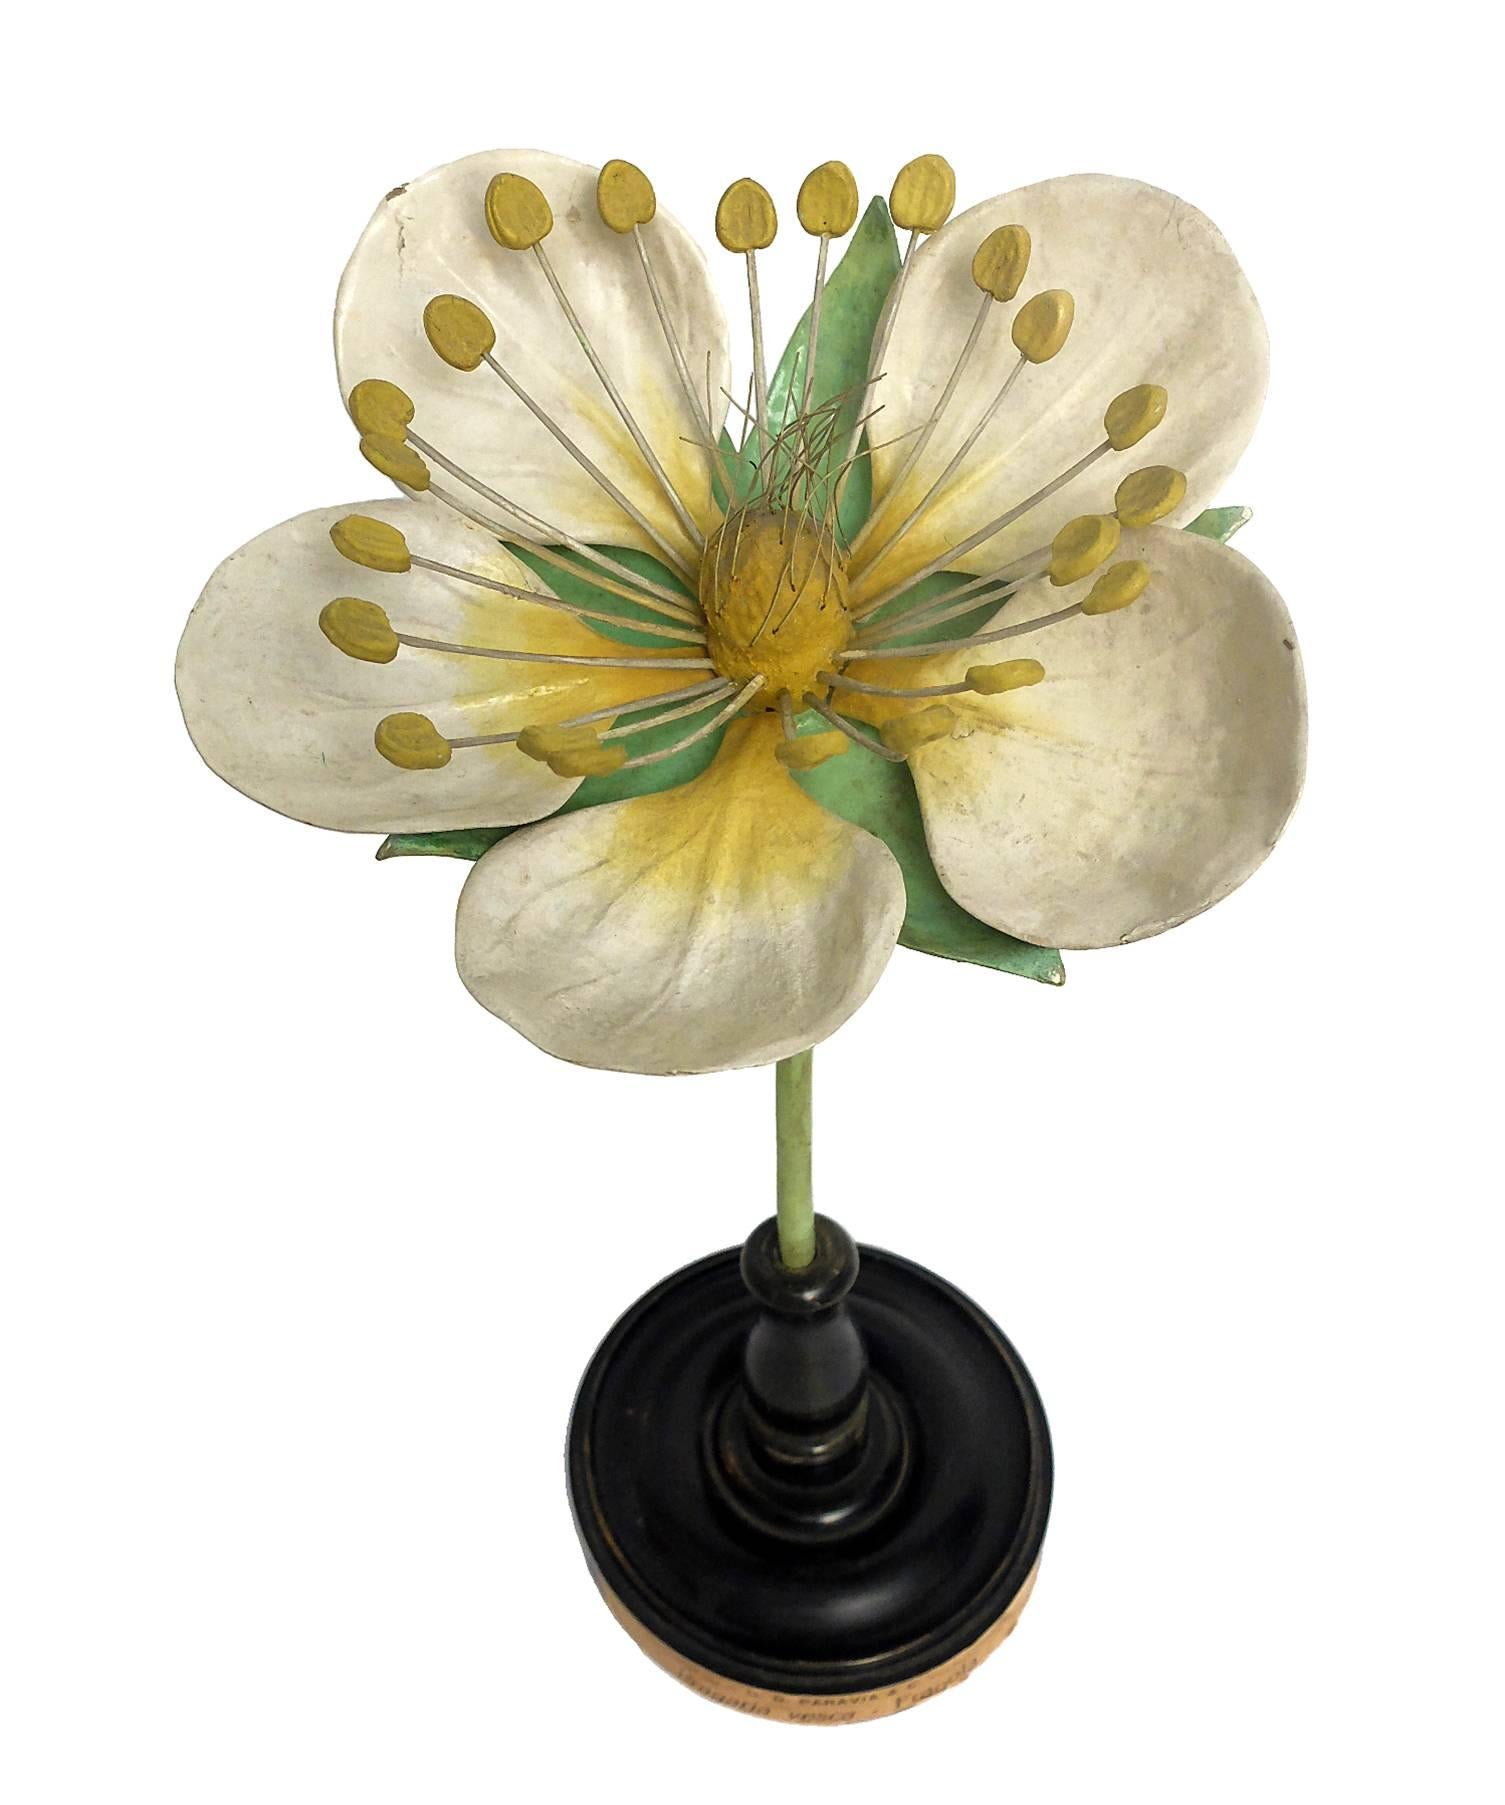 A rare botanic didactical specimen depicting a strawberry flower Fragalia Vesca; pale green white color. Made out of papier mâché, wood and metal. Black wooden base hand painted. Extremely detailed. Paravia, Milano.